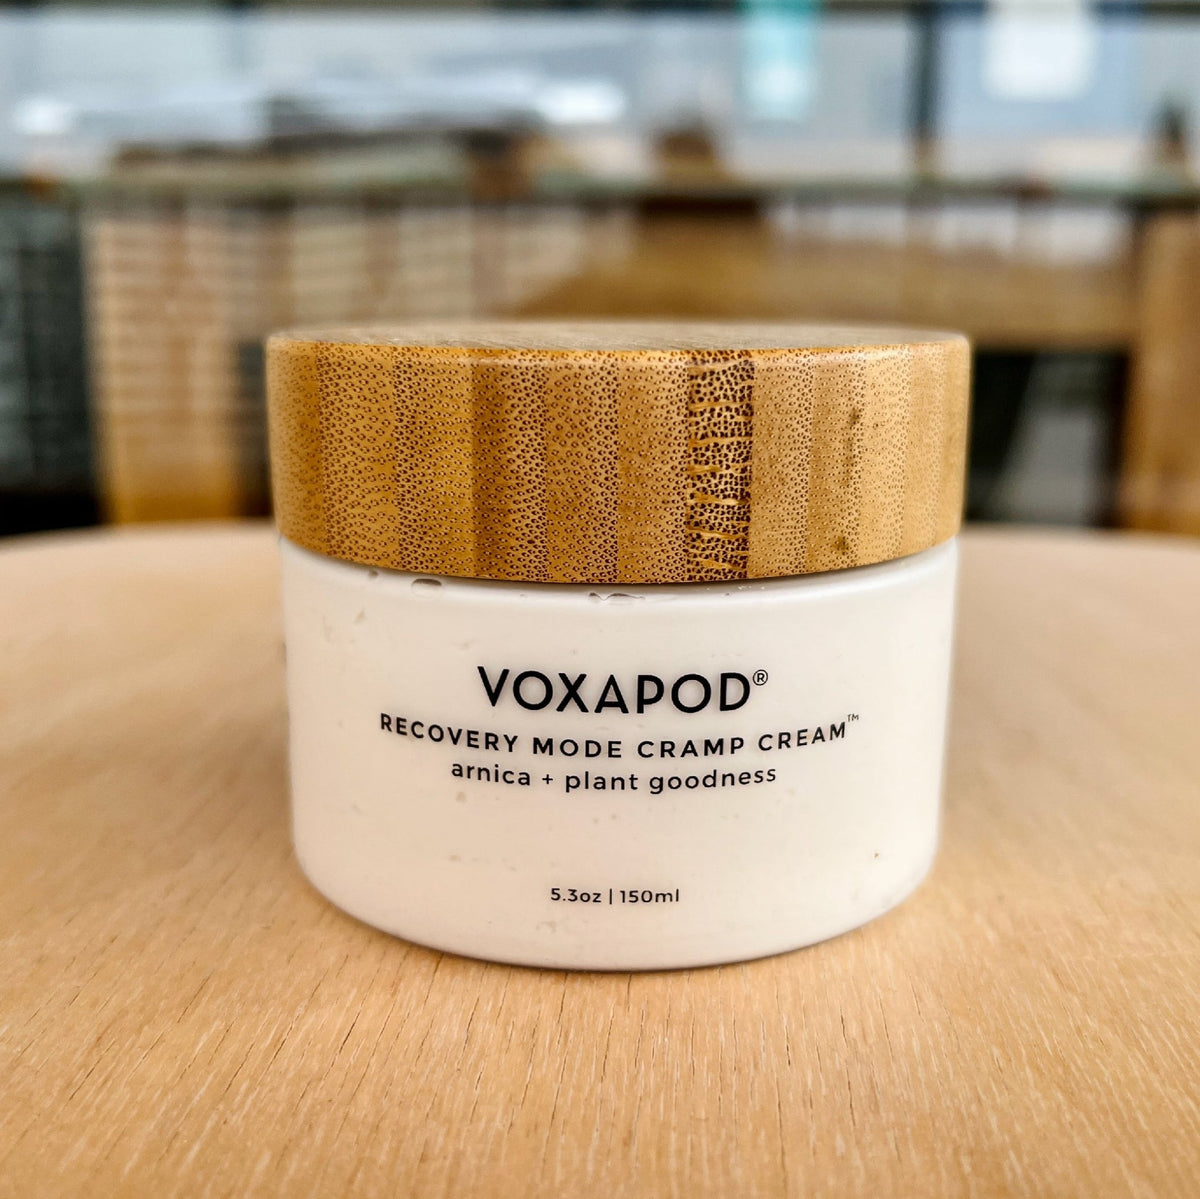 Recovery Mode Period Cramp Cream - VOXAPOD® soft reusable medical grade silicone fda approved period cup